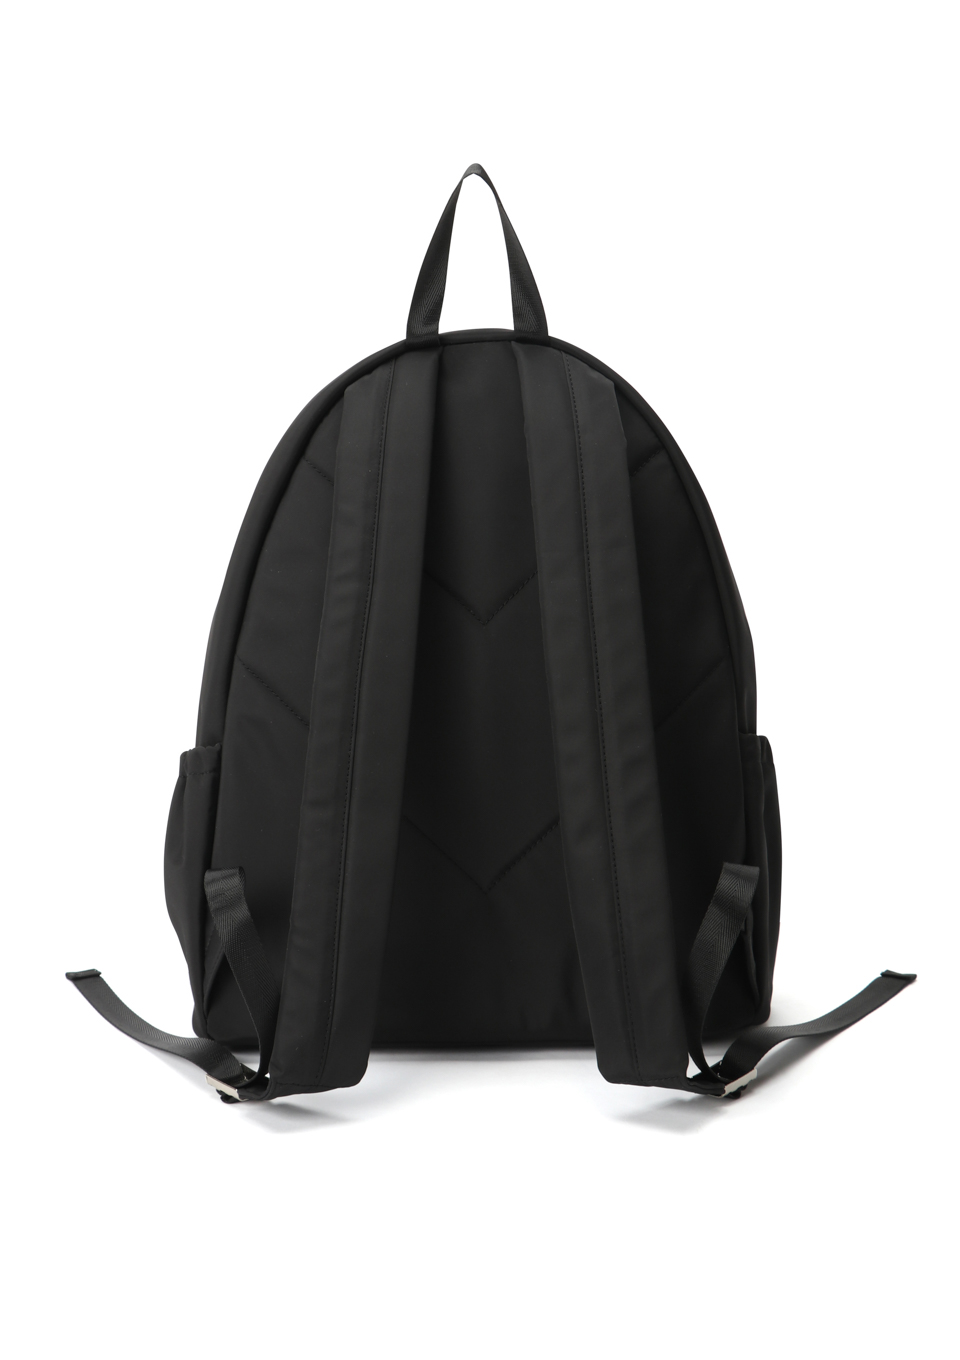 CITY POLLY BACKPACK